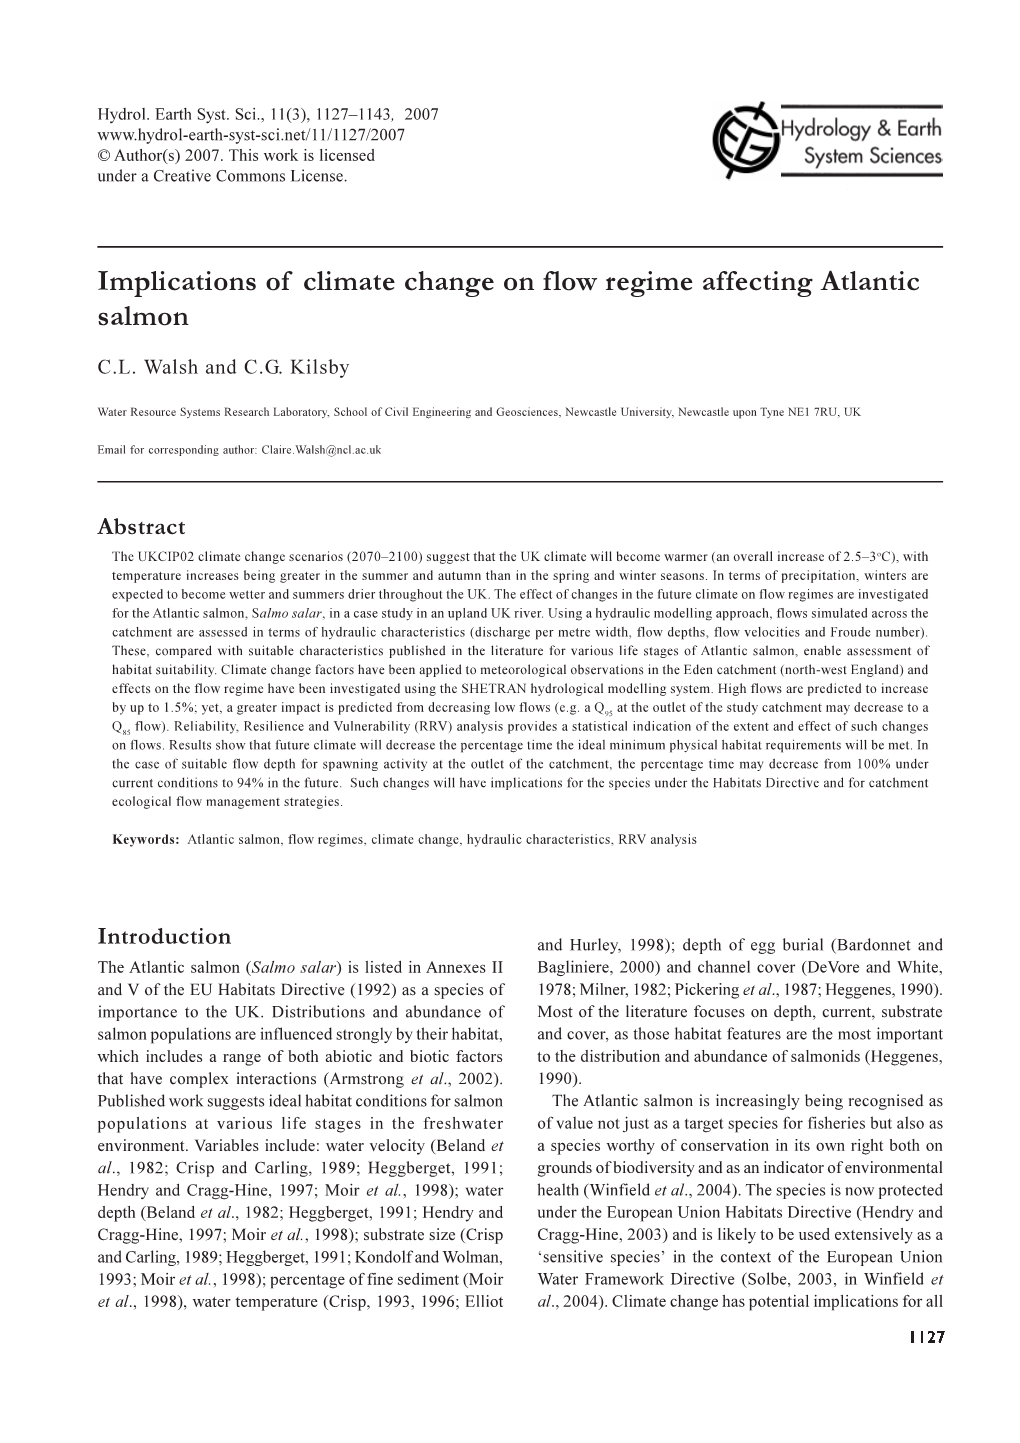 Implications of Climate Change on Flow Regime Affecting Atlantic Salmon © Author(S) 2007